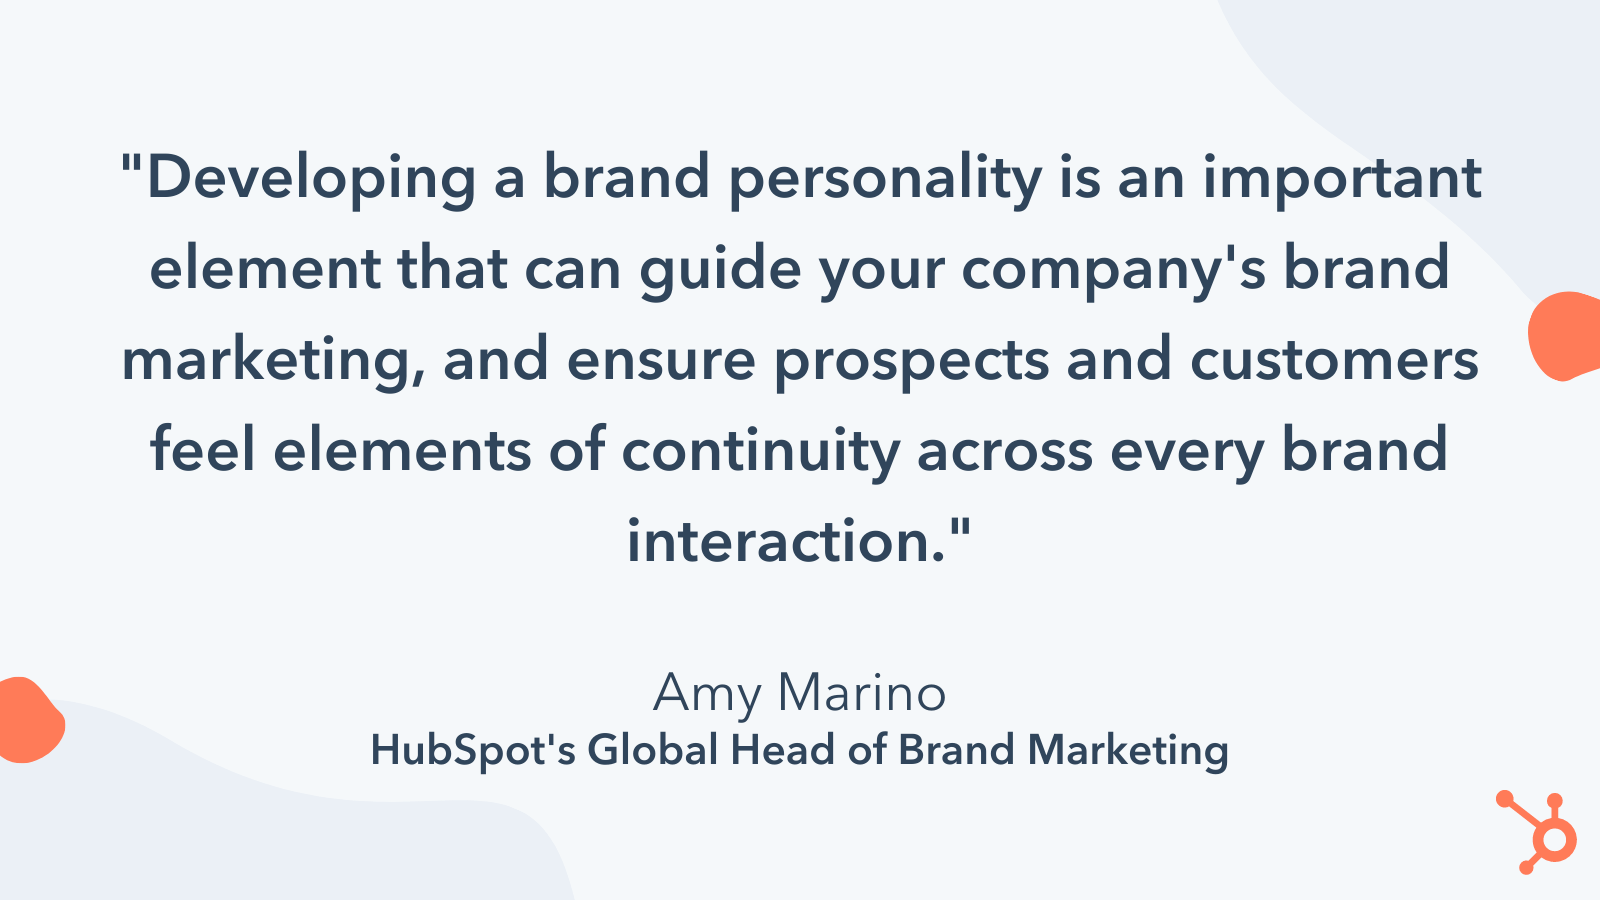 Brand Personality: How to Build a More Human Brand